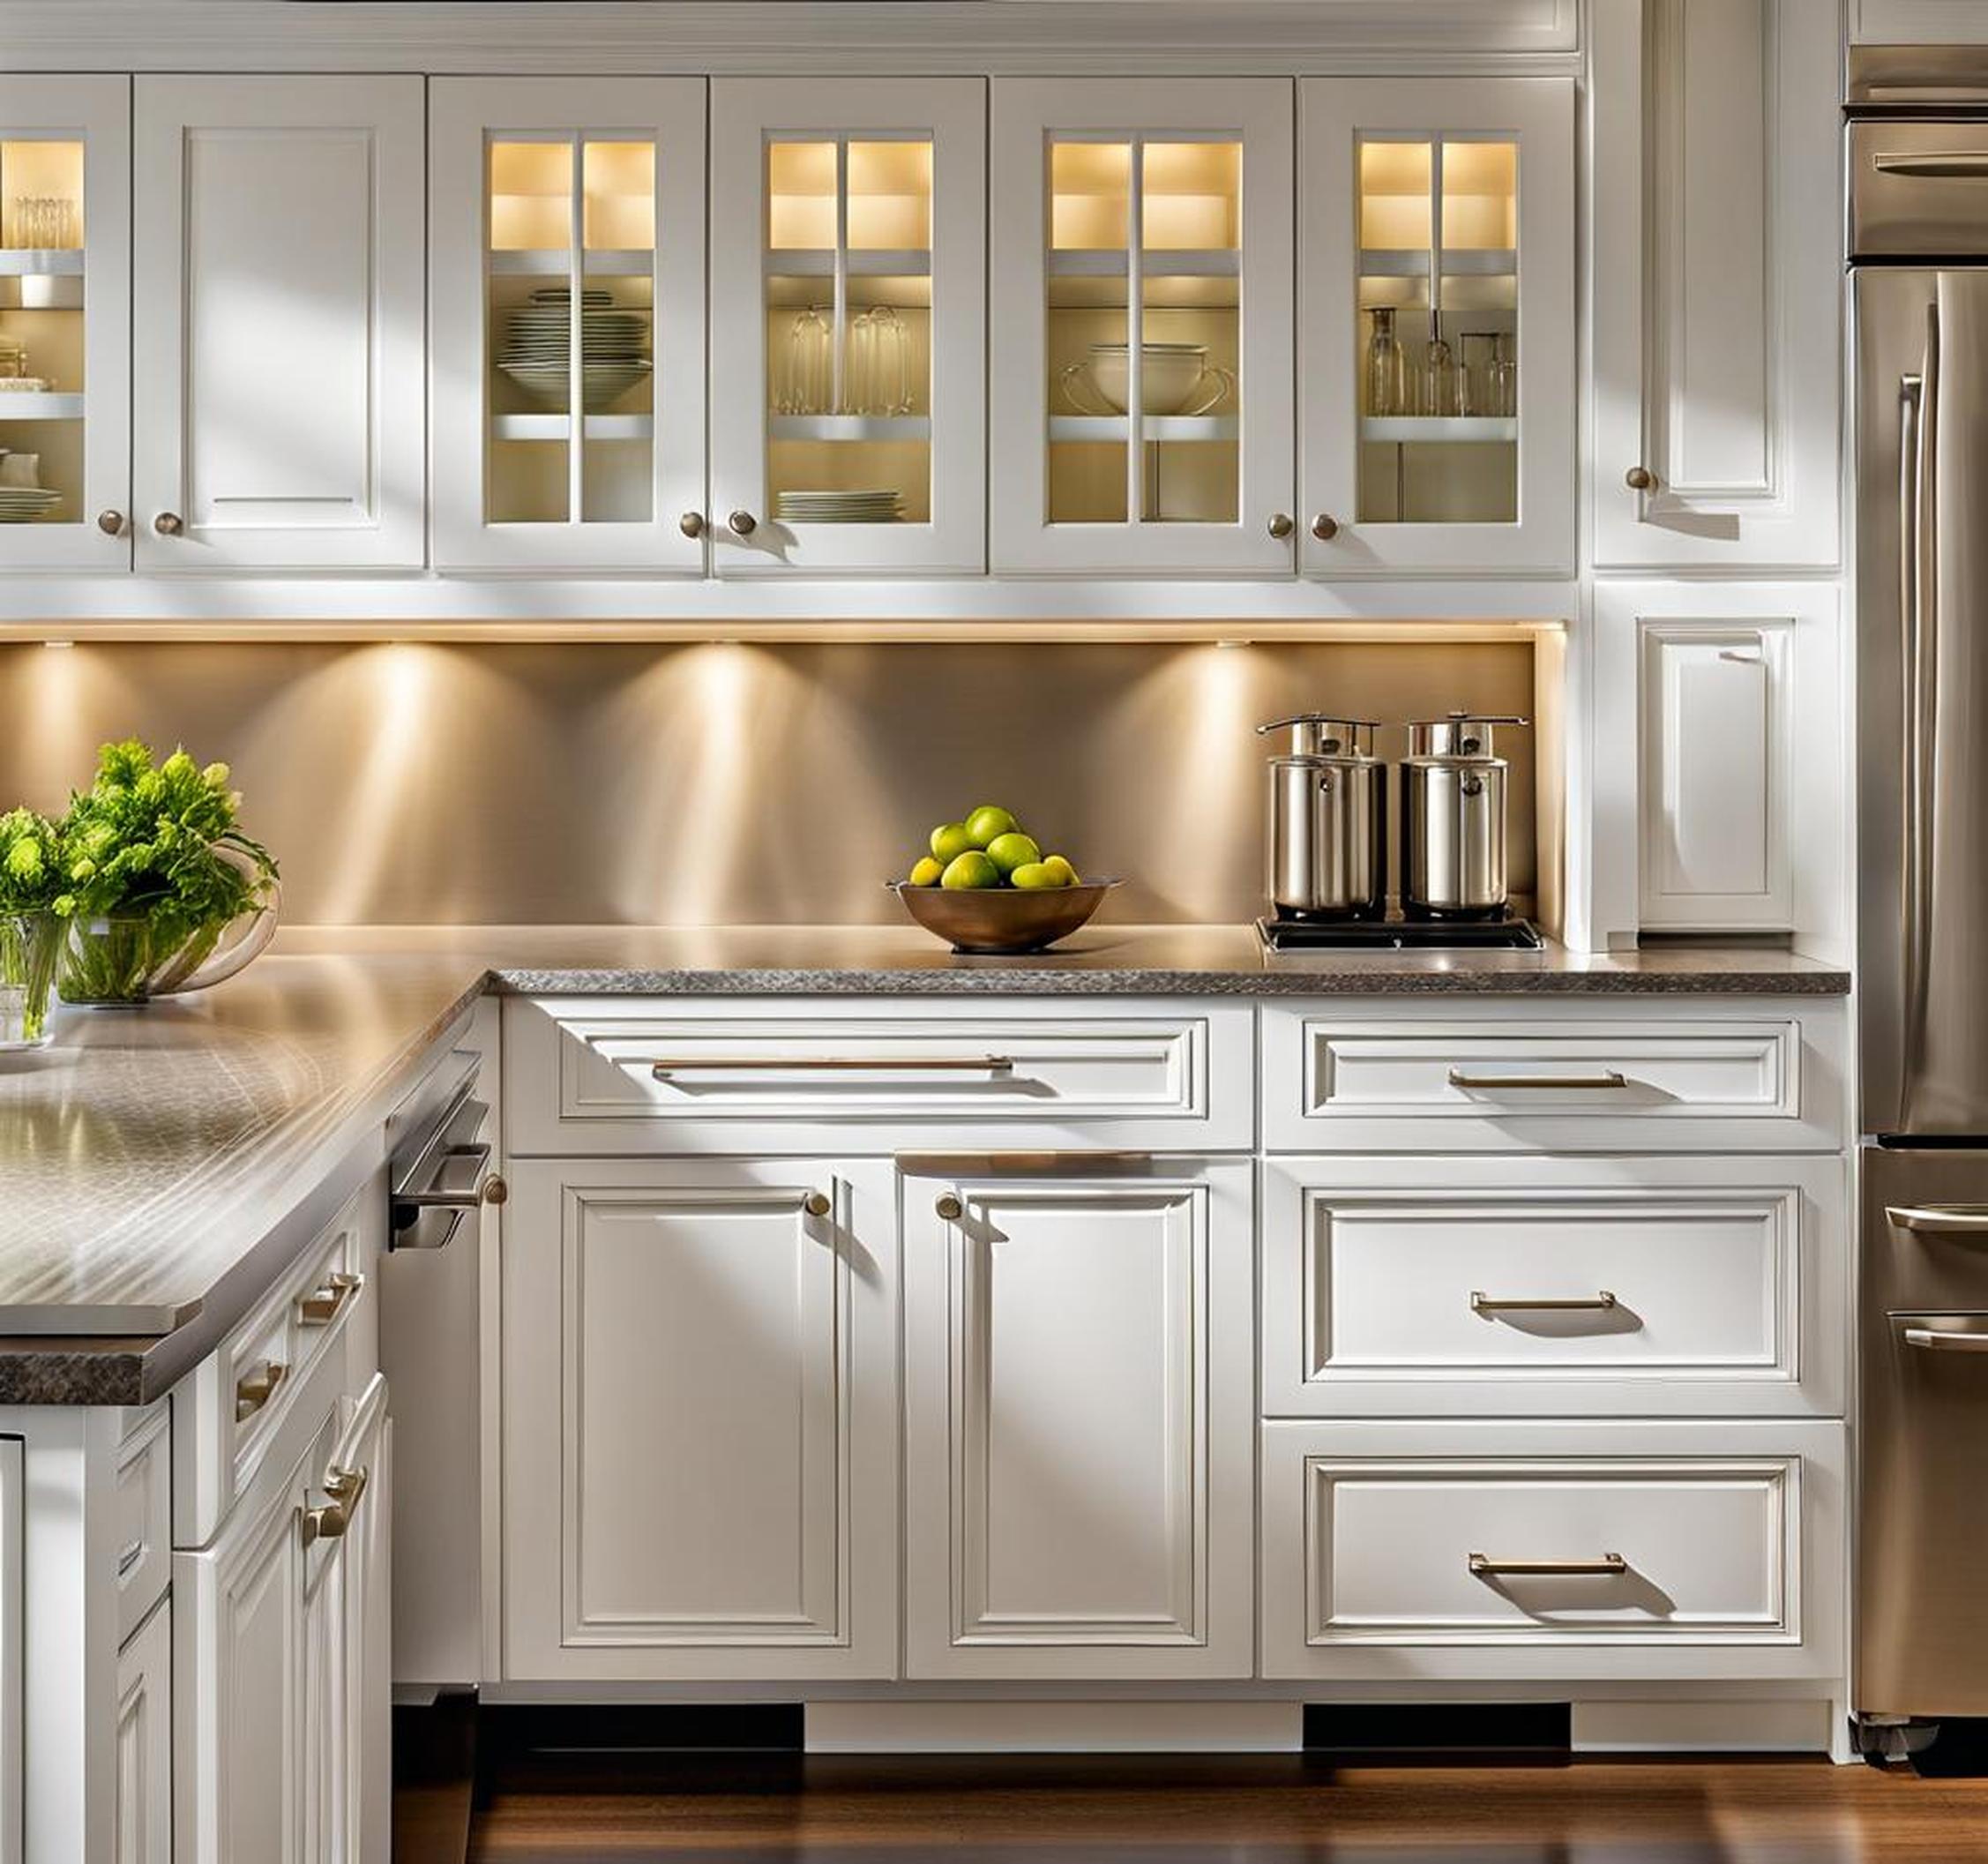 white cabinets with brushed nickel hardware